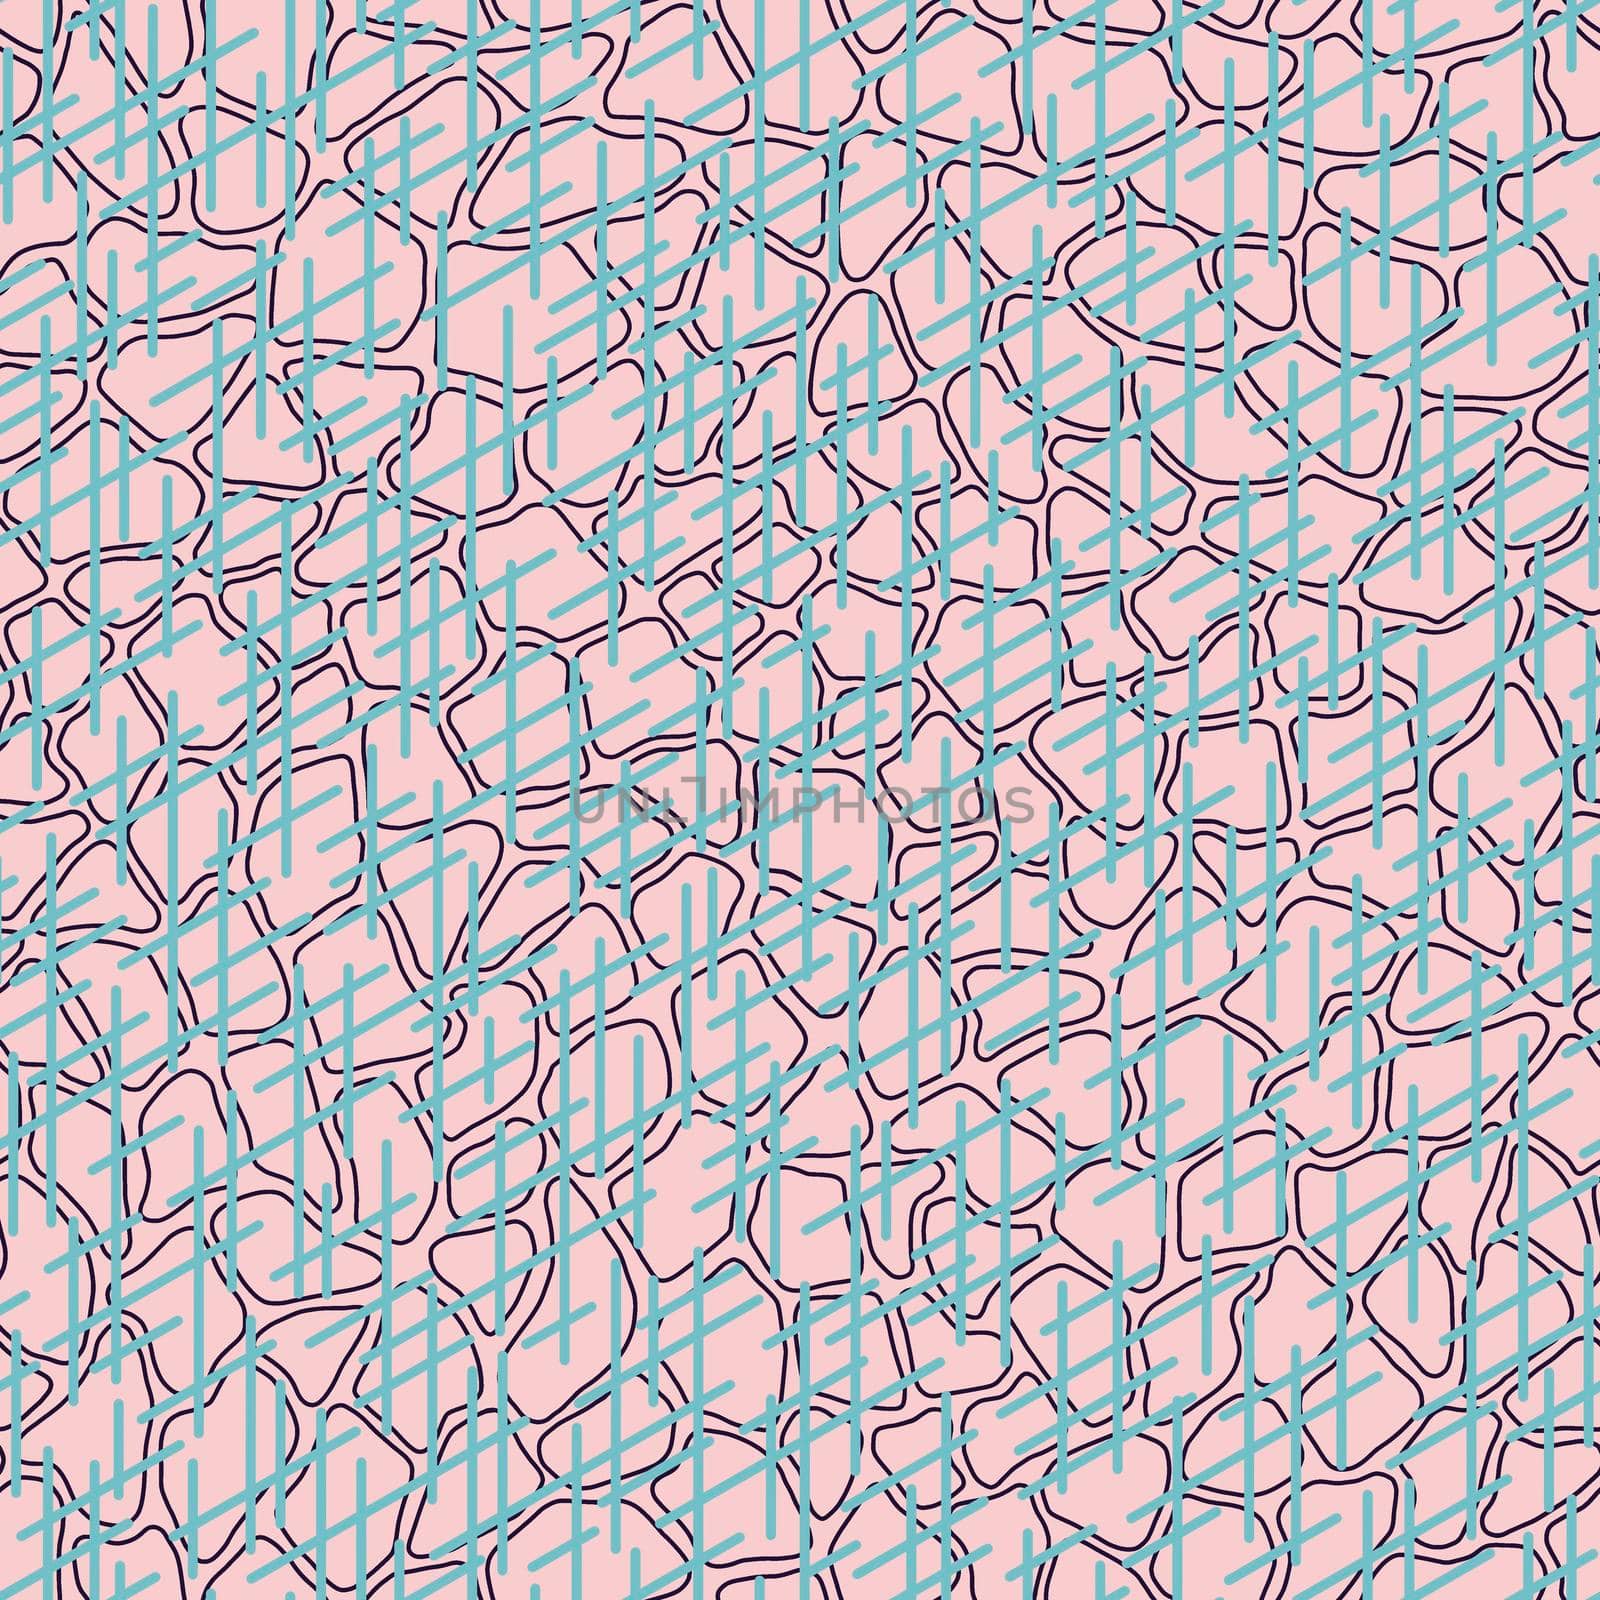 Randomly crossing lines making pattern.Chaotic short lines seamless pattern,chips and sticks modern repeatable motif.Good for print,textile,fabric,background,wrapping paper.Pink burgundy azure colors by Angelsmoon